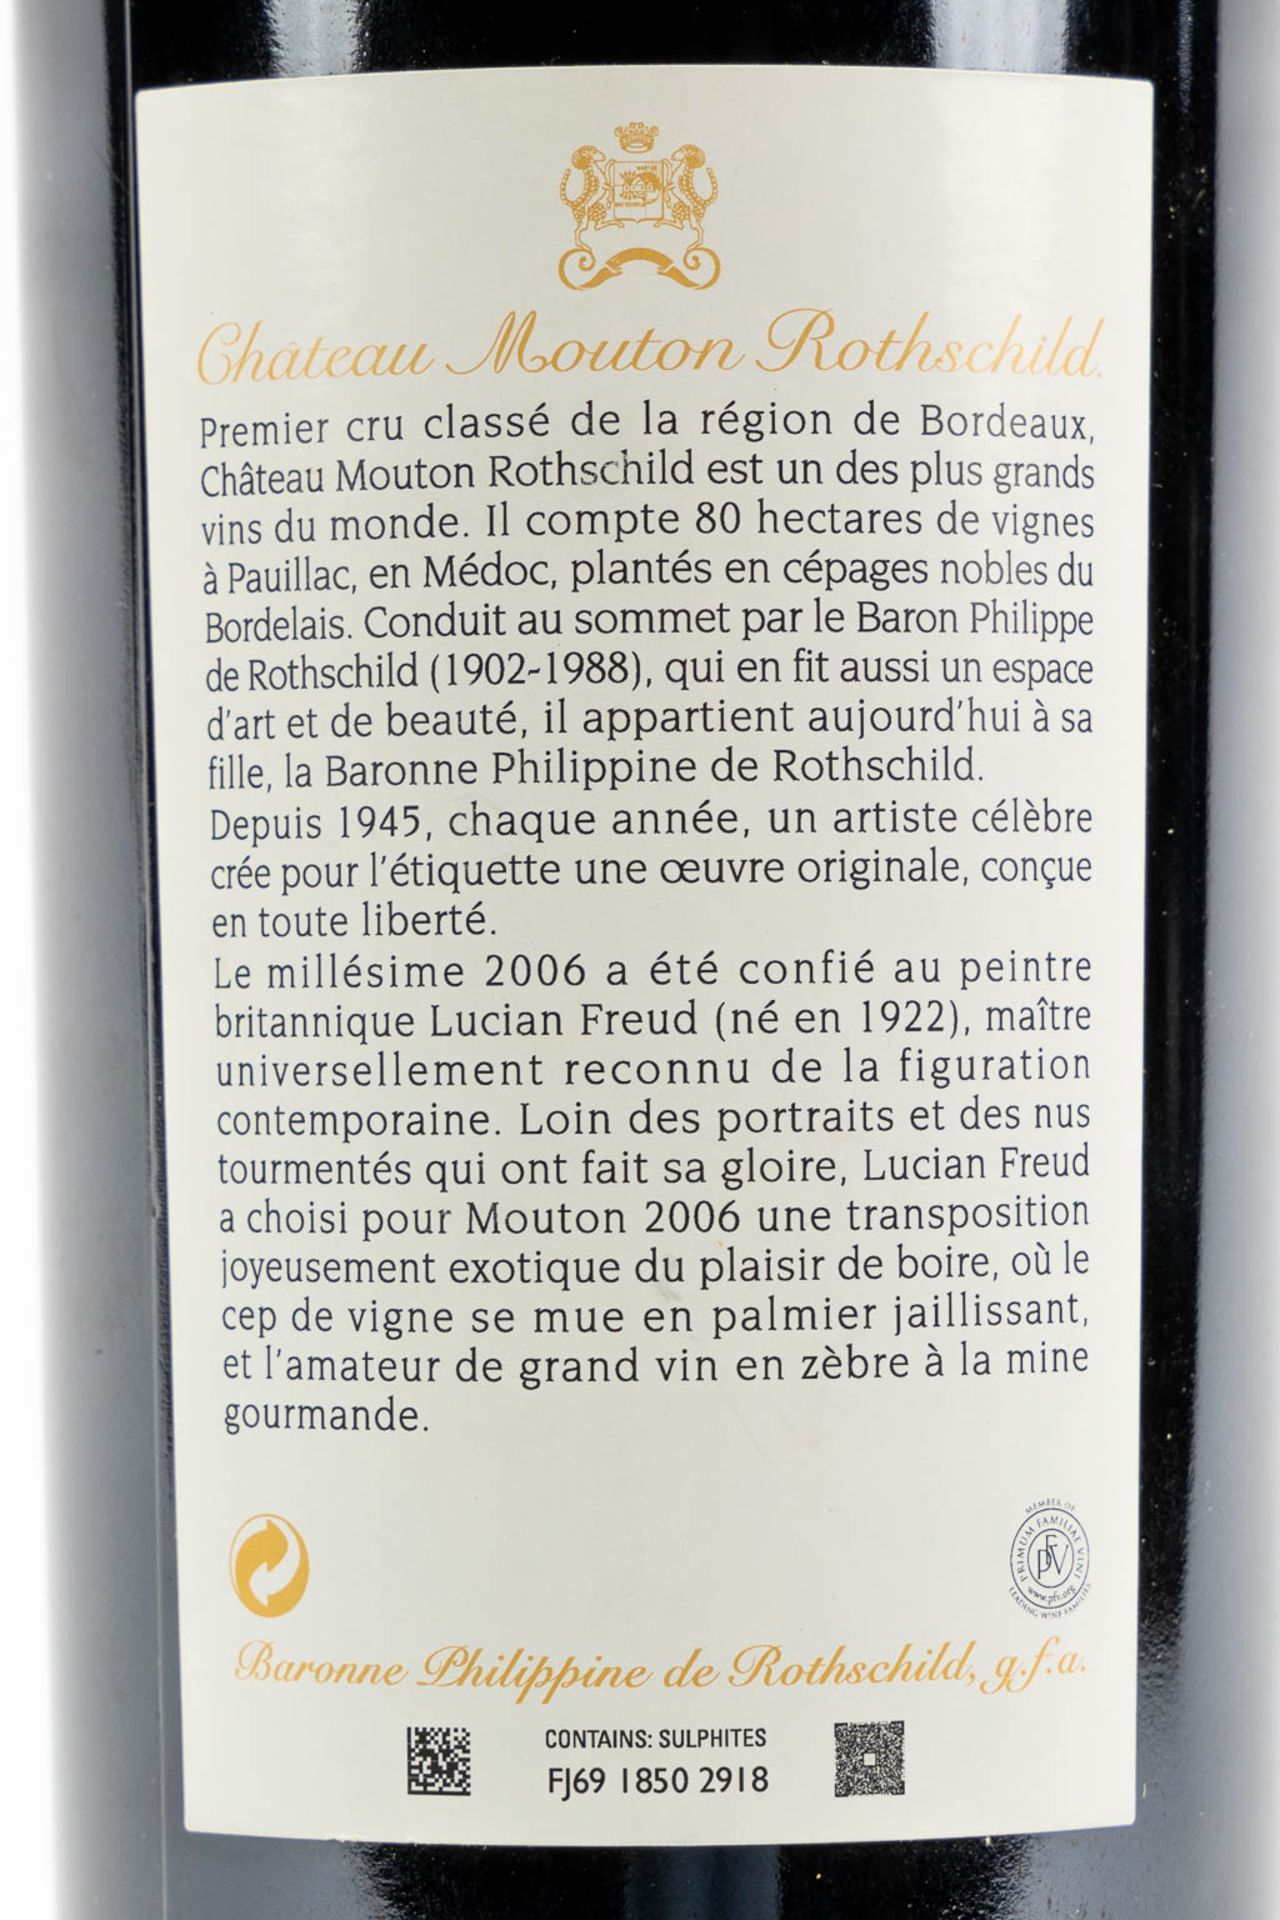 2006 Château Mouton Rothschild, Lucian Freud - Image 3 of 3